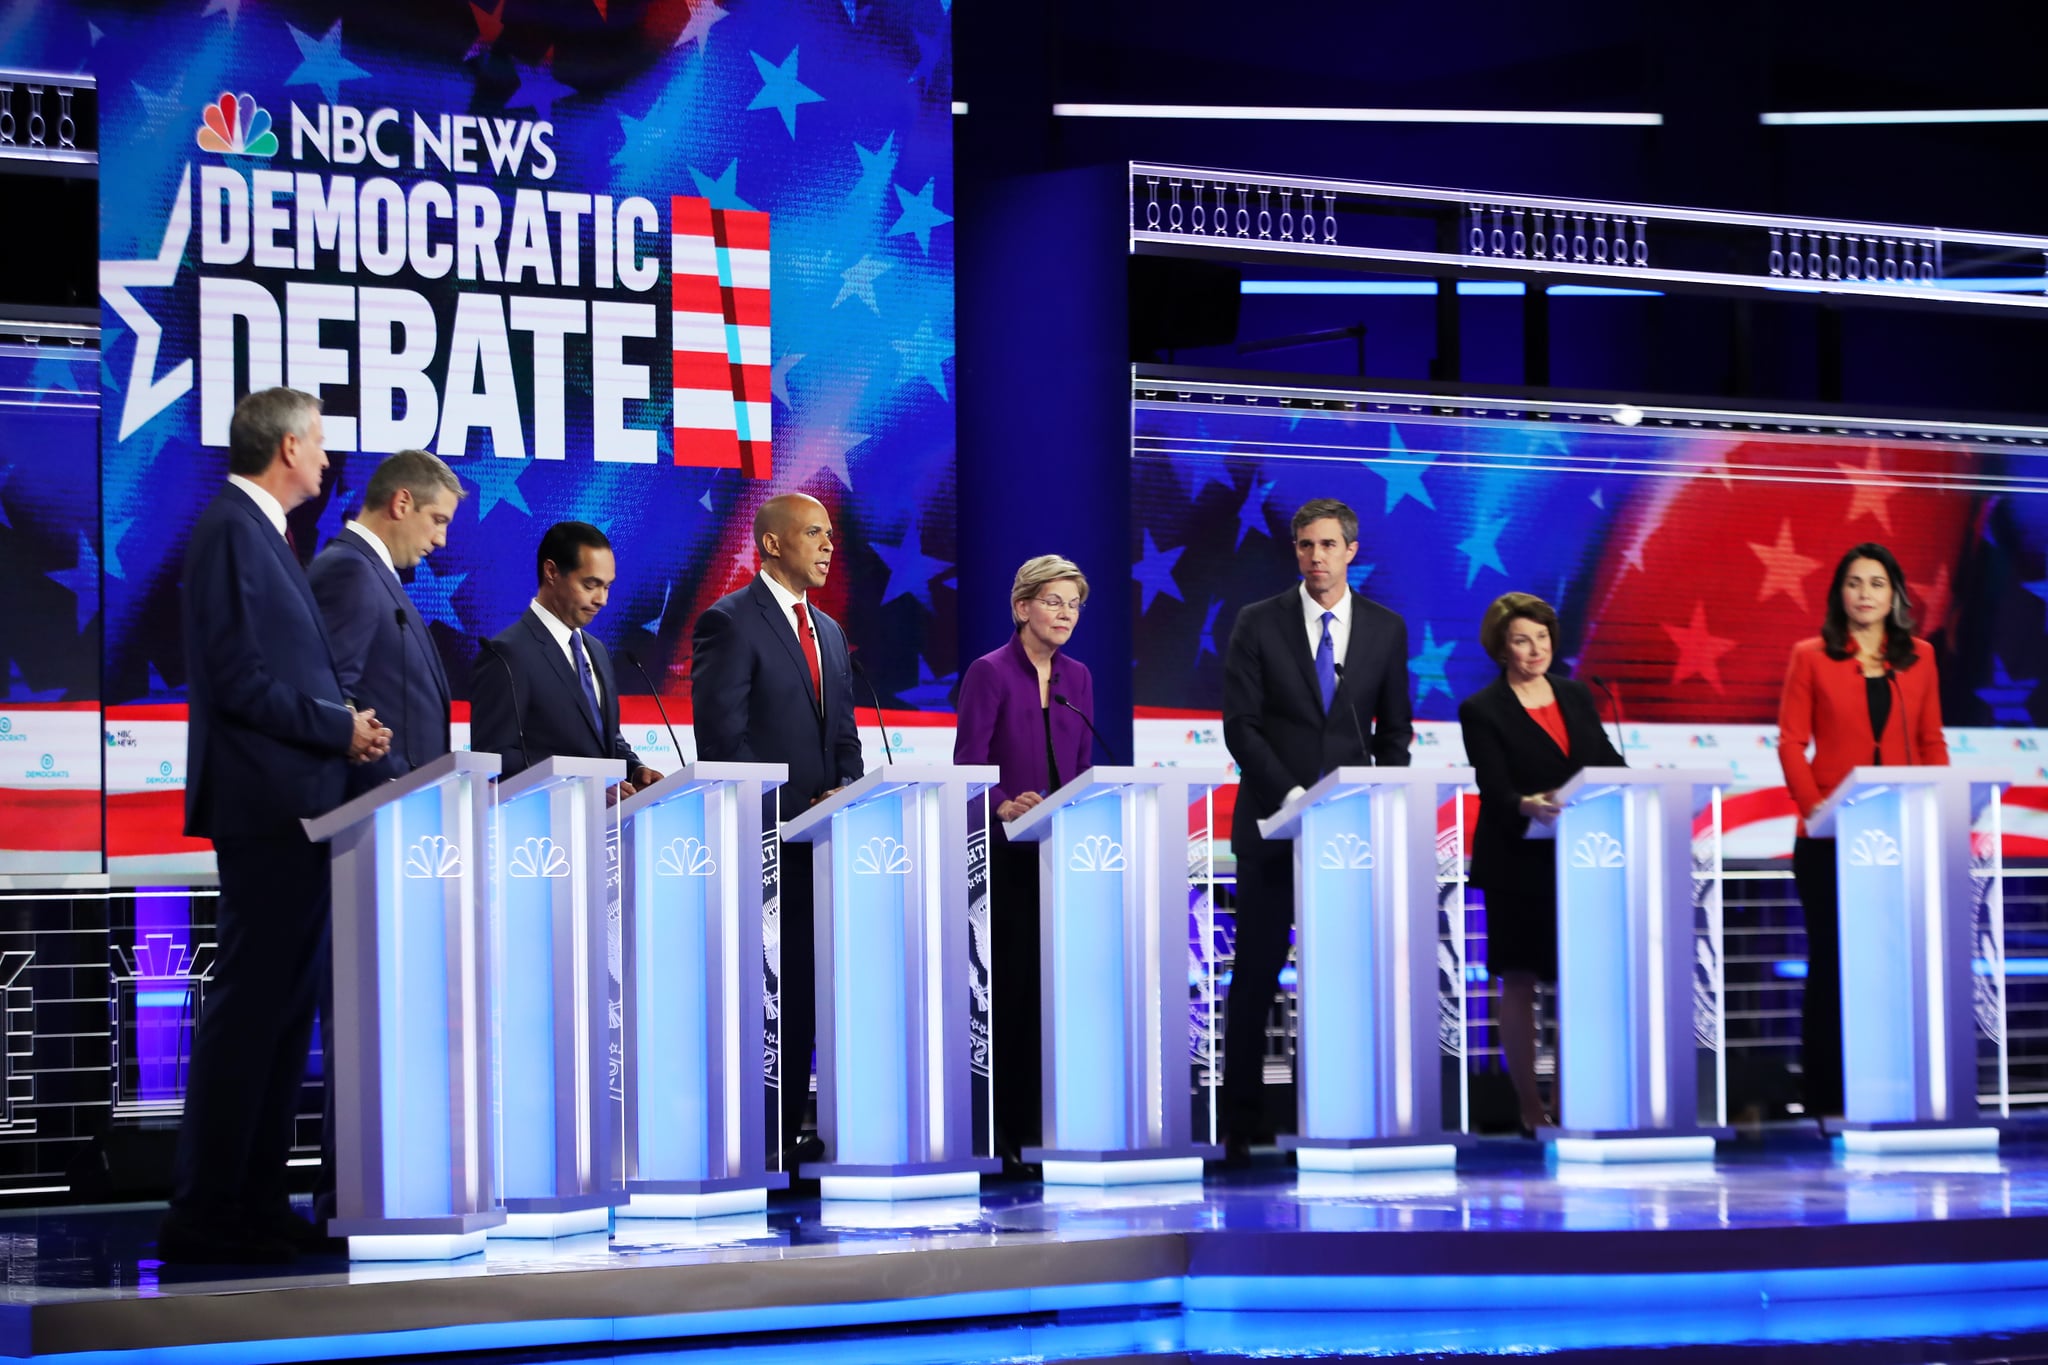 MIAMI, FLORIDA - JUNE 26: Democratic presidential candidates New York City Mayor Bill De Blasio (L-R), Rep. Tim Ryan (D-OH), former housing secretary Julian Castro, Sen. Cory Booker (D-NJ), Sen. Elizabeth Warren (D-MA), former Texas congressman Beto O'Rourke, Sen. Amy Klobuchar (D-MN) and Rep. Tulsi Gabbard (D-HI) take part in the first night of the Democratic presidential debate on June 26, 2019 in Miami, Florida.  A field of 20 Democratic presidential candidates was split into two groups of 10 for the first debate of the 2020 election, taking place over two nights at Knight Concert Hall of the Adrienne Arsht Center for the Performing Arts of Miami-Dade County, hosted by NBC News, MSNBC, and Telemundo. (Photo by Joe Raedle/Getty Images)